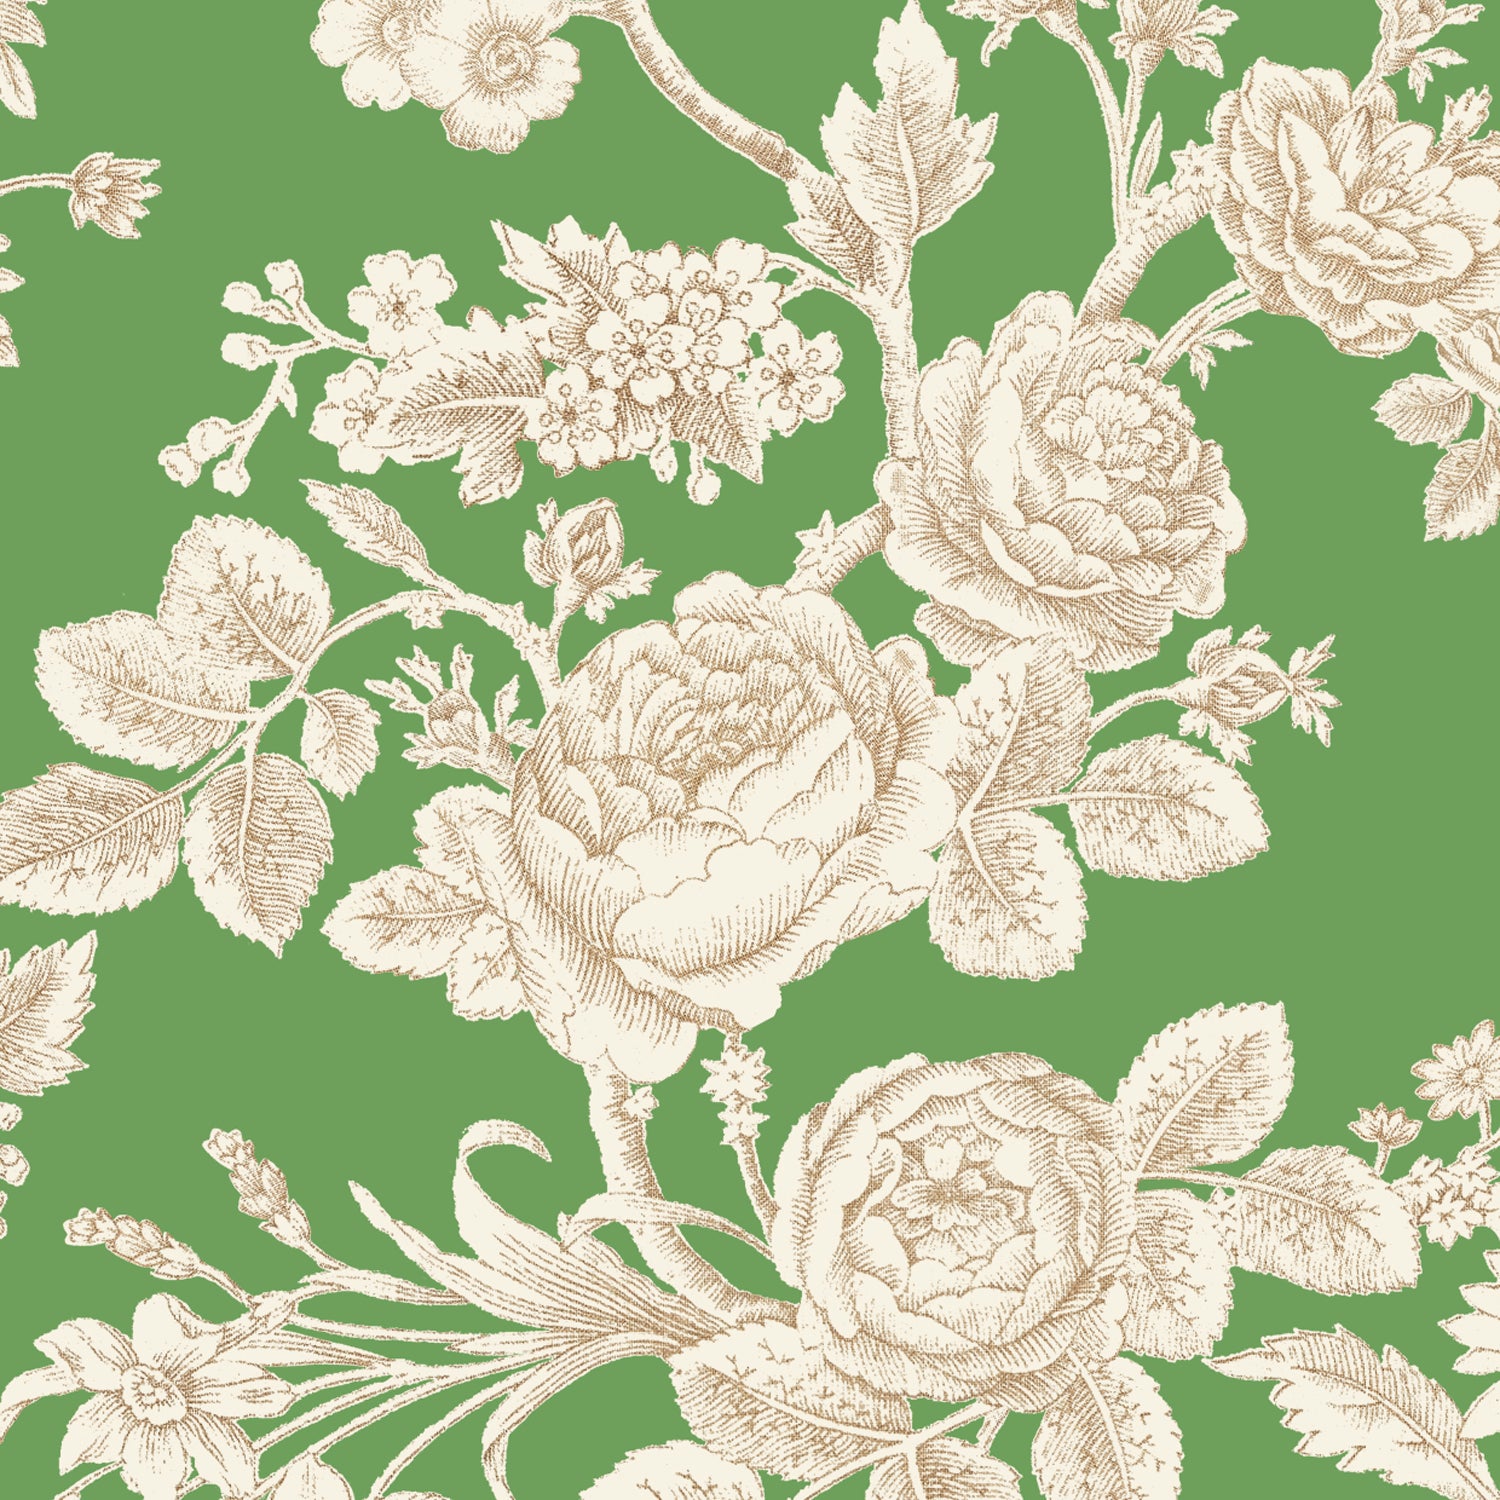 Detail of wallpaper in a classic floral print in tan and white on a green field.